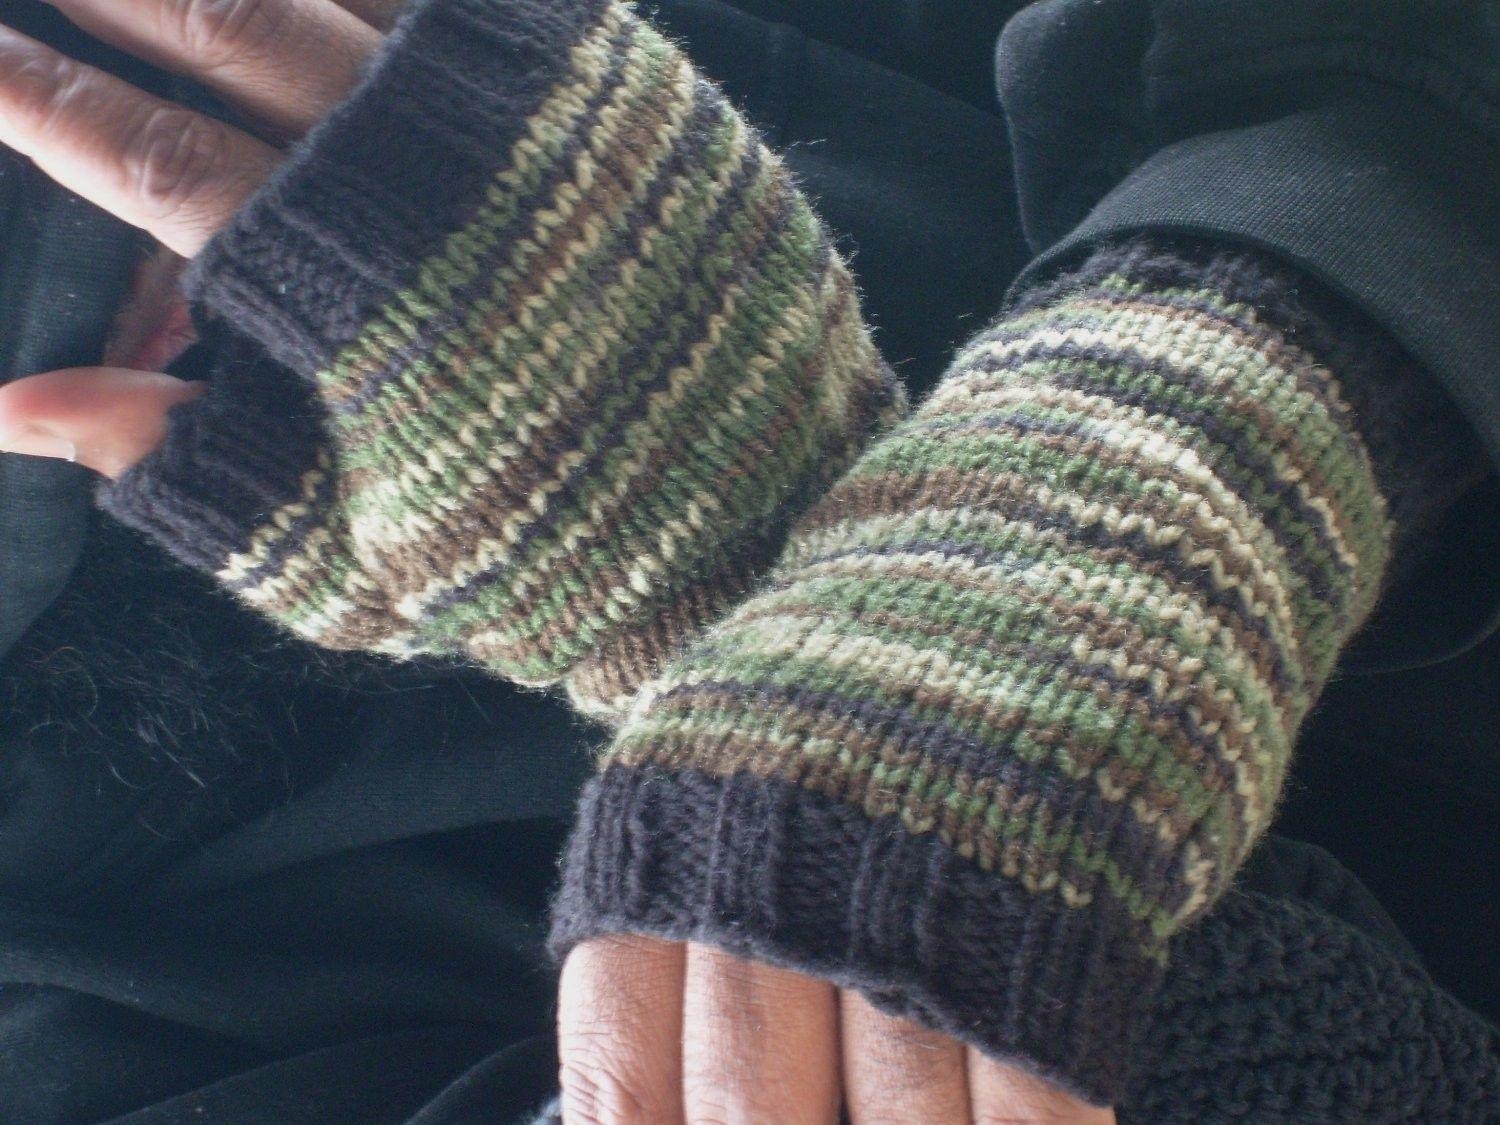 Exclusive Image of Mens Fingerless Gloves Knitting Pattern ...